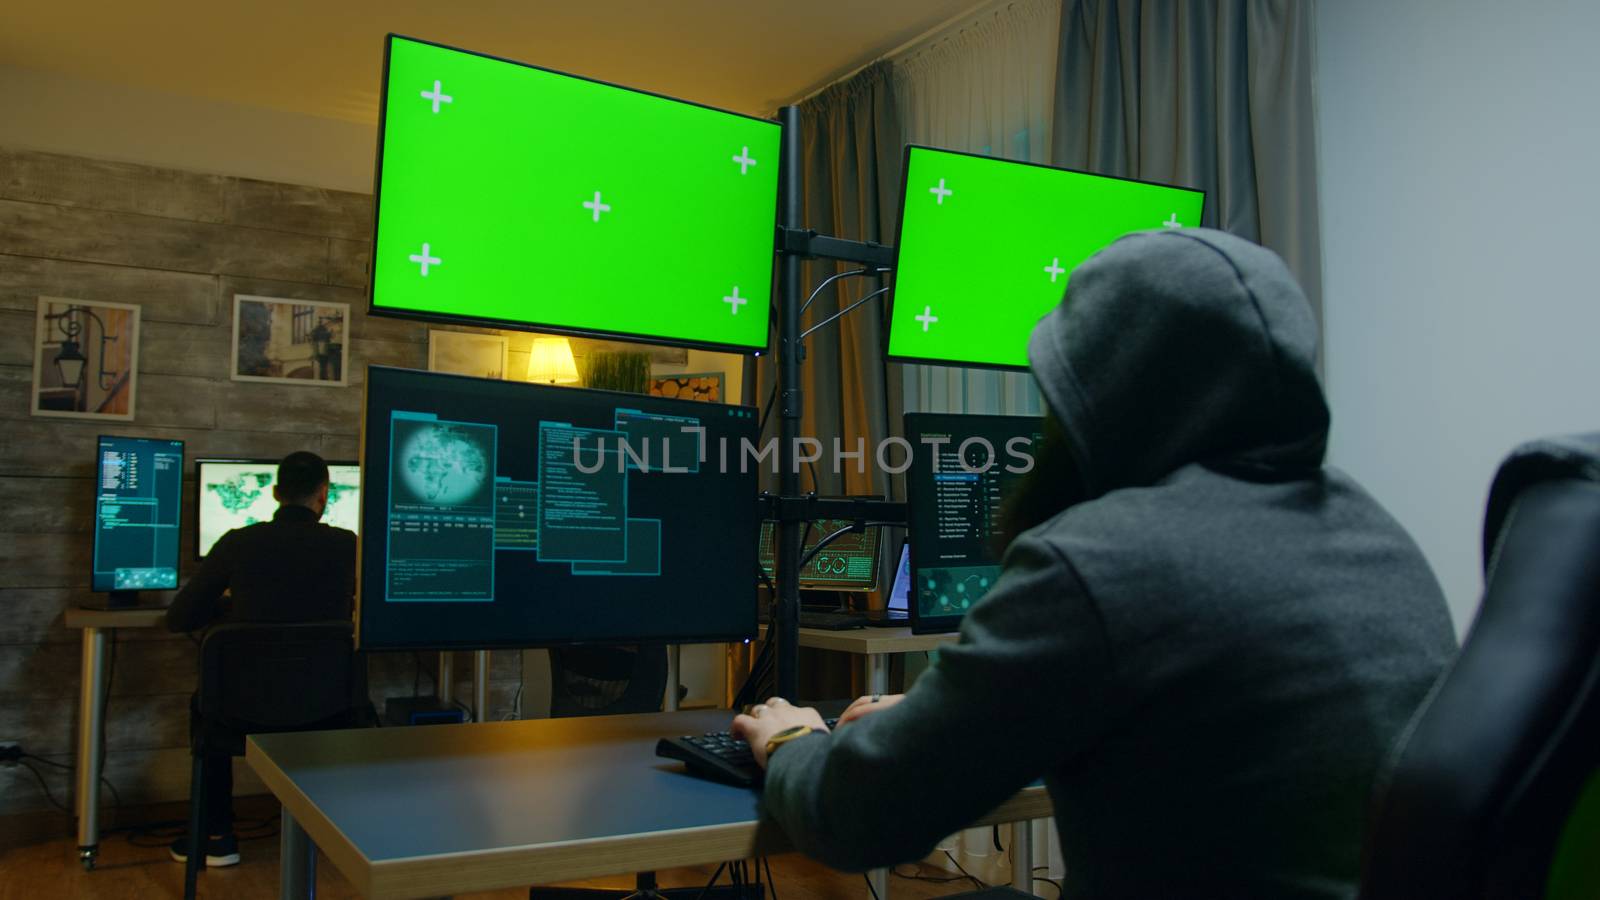 Hacker with a hoodies making a dangerous malware on computer with green screen.